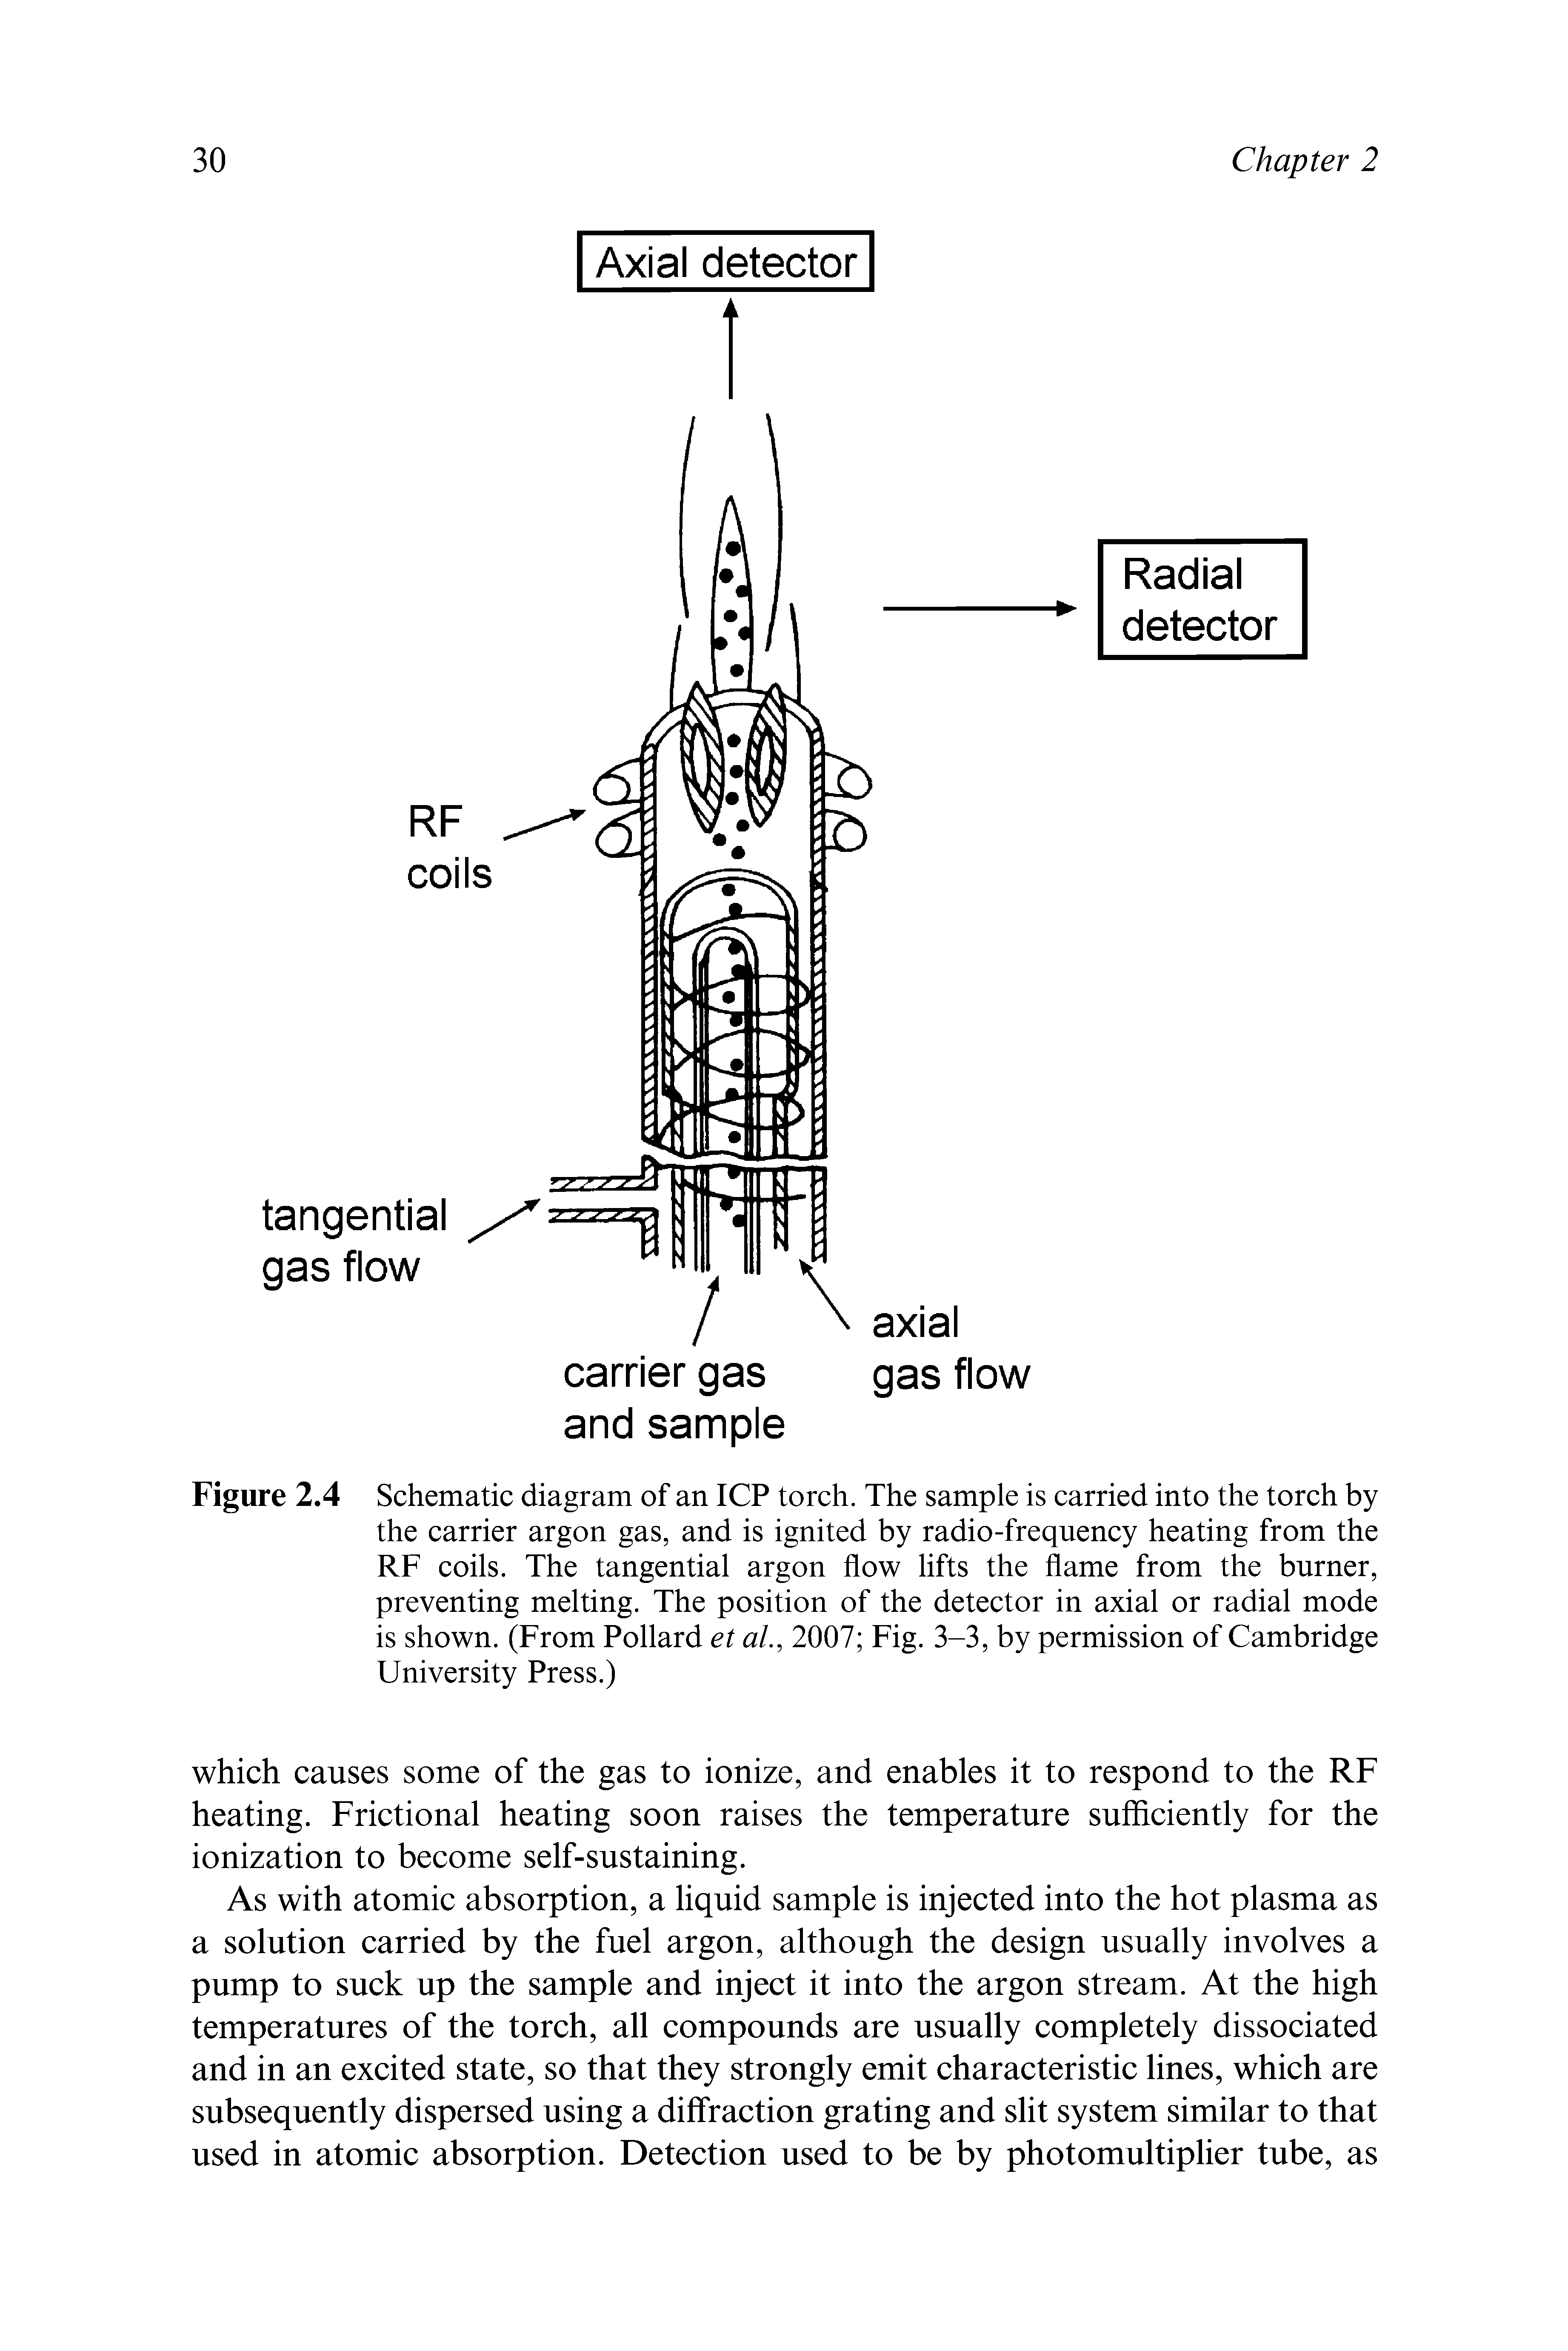 Figure 2.4 Schematic diagram of an ICP torch. The sample is carried into the torch by the carrier argon gas, and is ignited by radio-frequency heating from the RF coils. The tangential argon flow lifts the flame from the burner, preventing melting. The position of the detector in axial or radial mode is shown. (From Pollard et al., 2007 Fig. 3-3, by permission of Cambridge University Press.)...